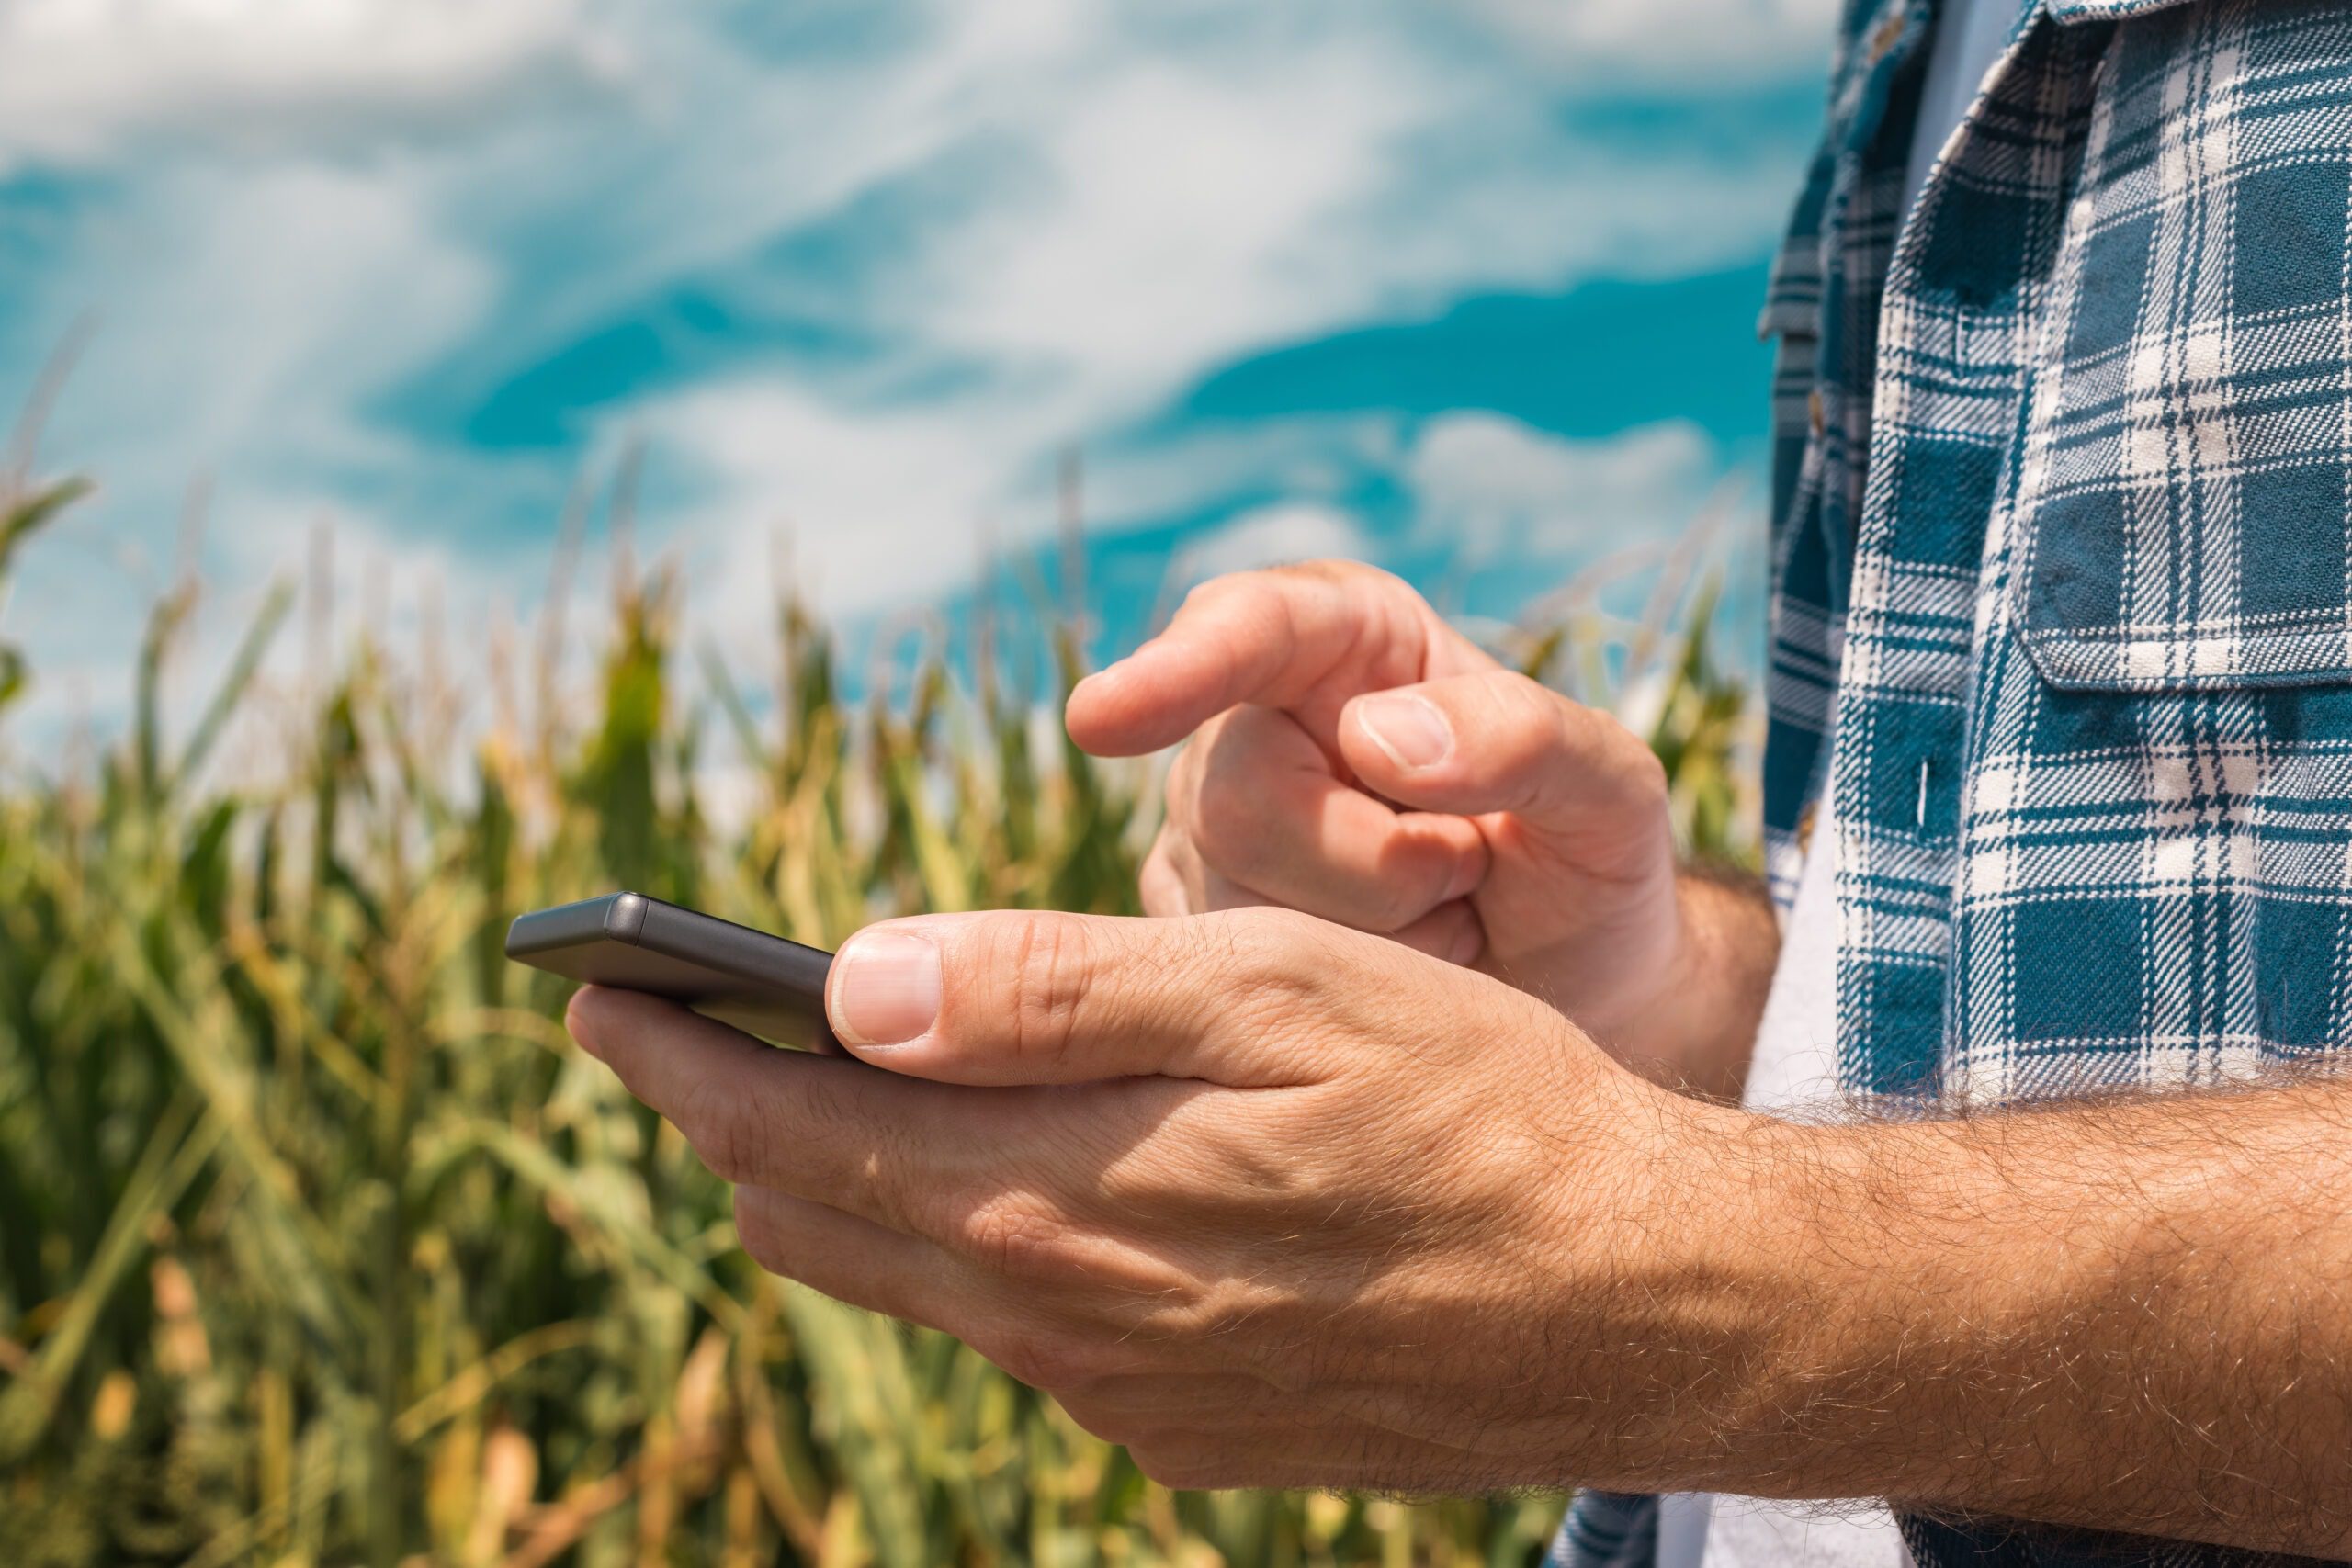 Agronomist typing text message on smartphone out in corn field